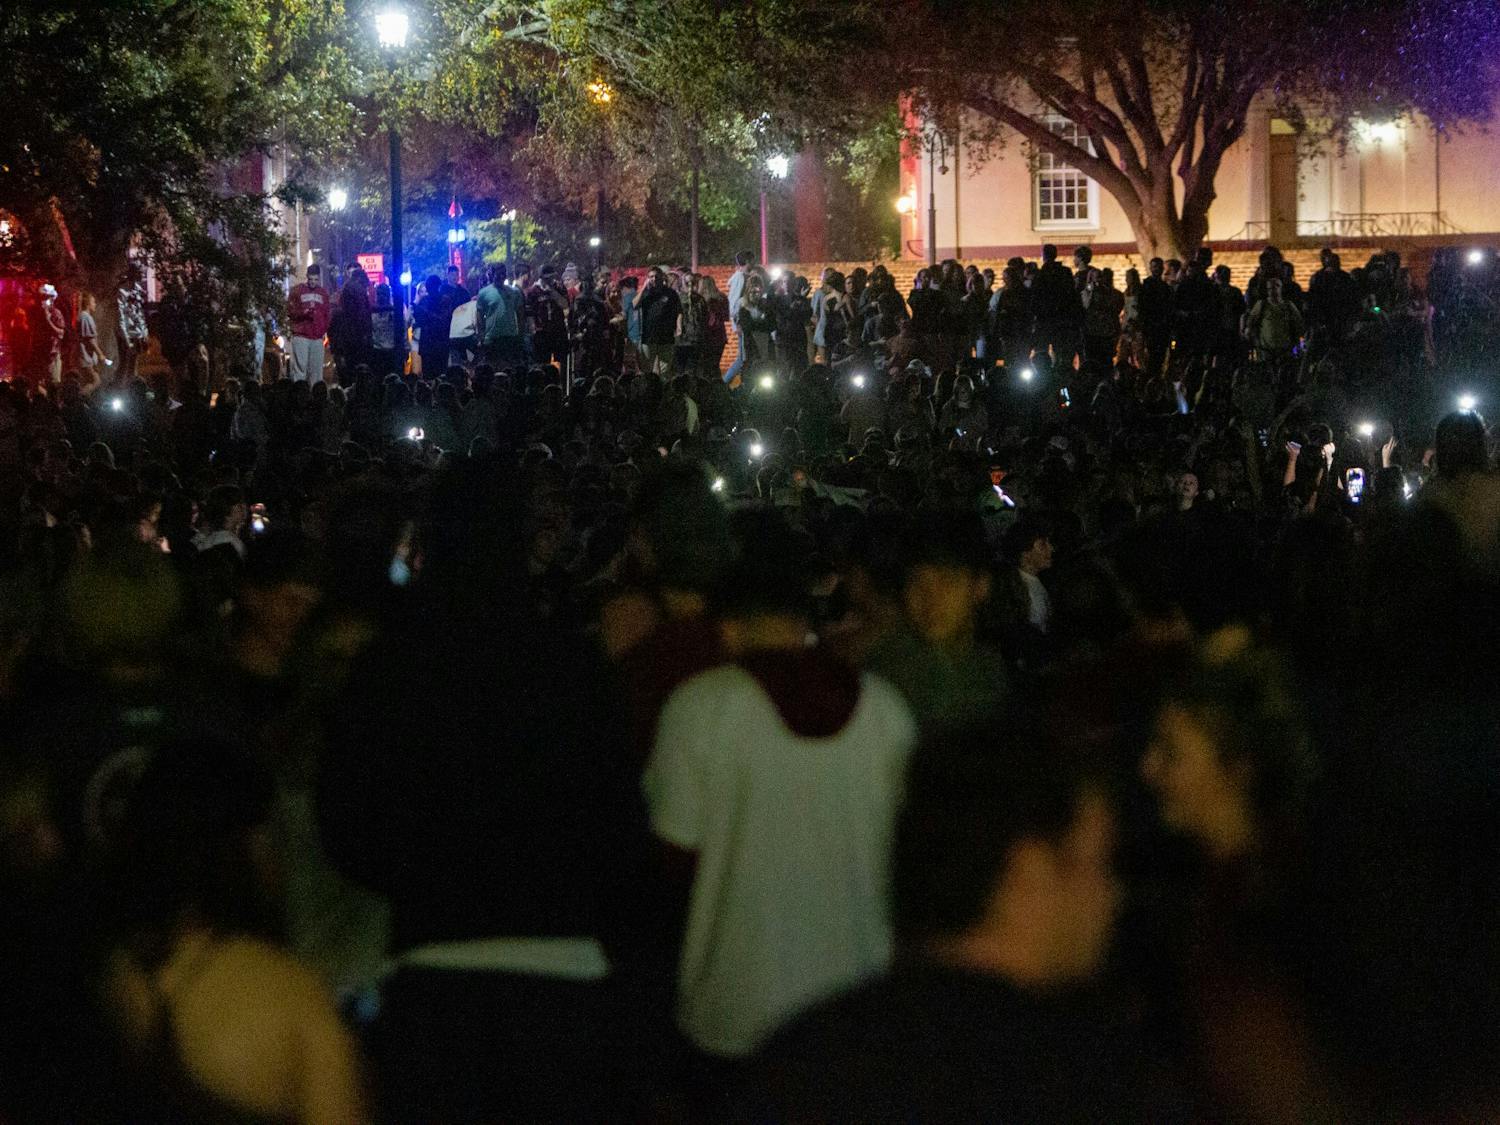 Students at the University of South Carolina storm the fountain at Thomas Cooper Library on April 3, 2022 in Columbia, SC. The celebration came shortly after the women's basketball team defeated UConn in the NCAA championship.&nbsp;